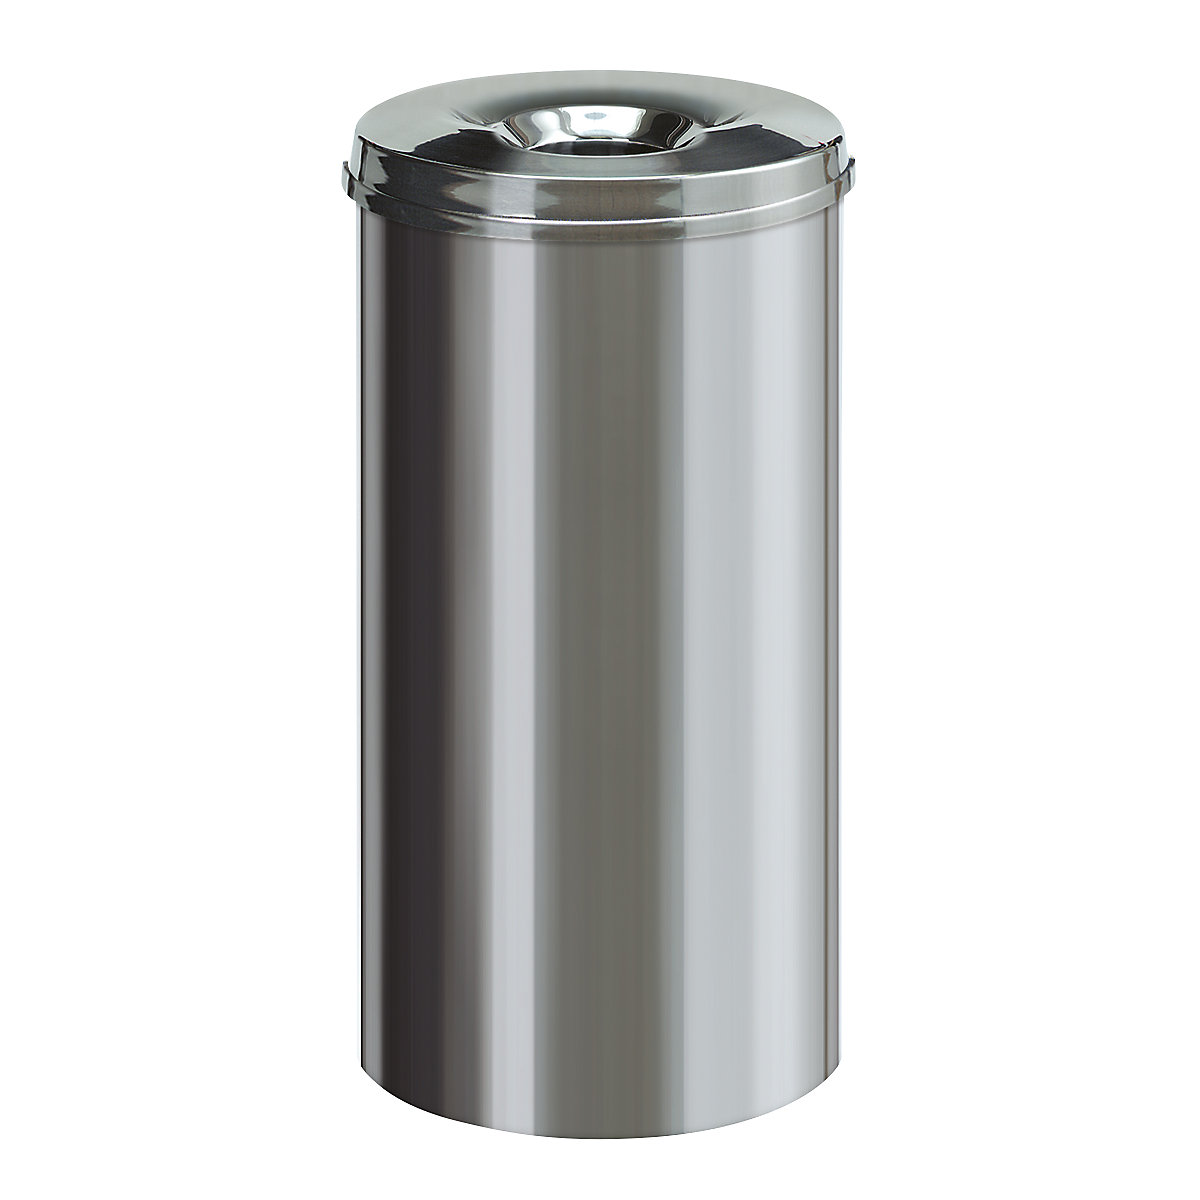 Safety waste paper bin, stainless steel – Brabantia, self-extinguishing, capacity 50 l, HxØ 625 x 335 mm, glossy-3